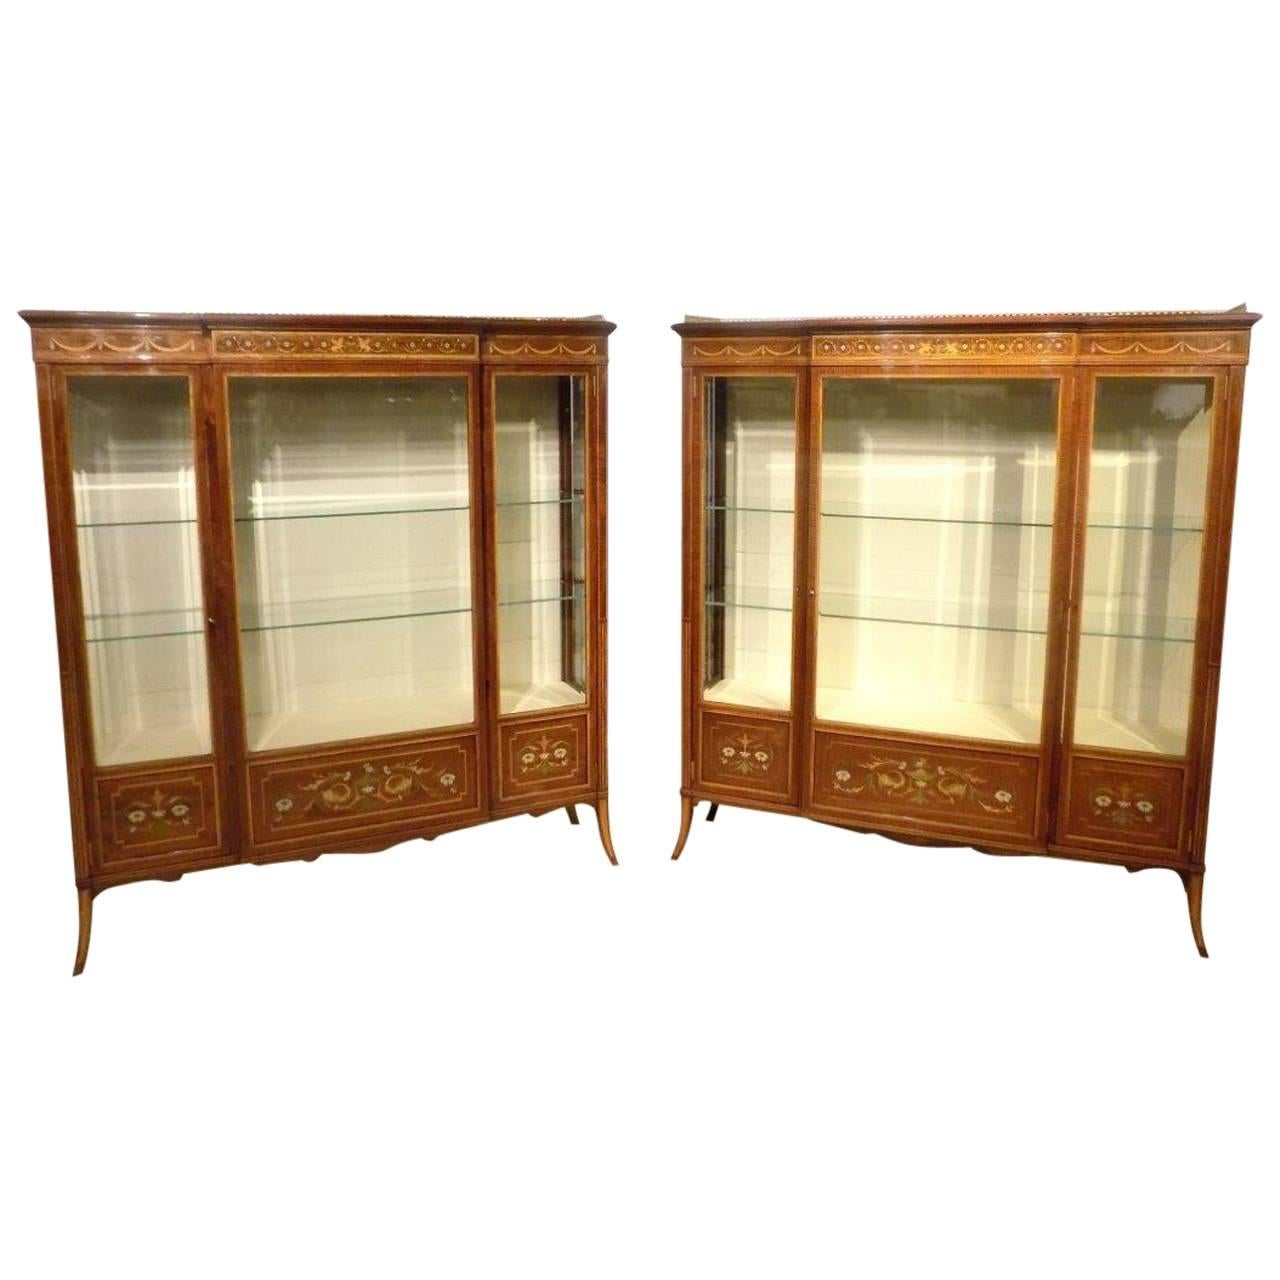 Stunning Quality Pair of Fiddleback Mahogany Inlaid Antique Display Cabinets For Sale